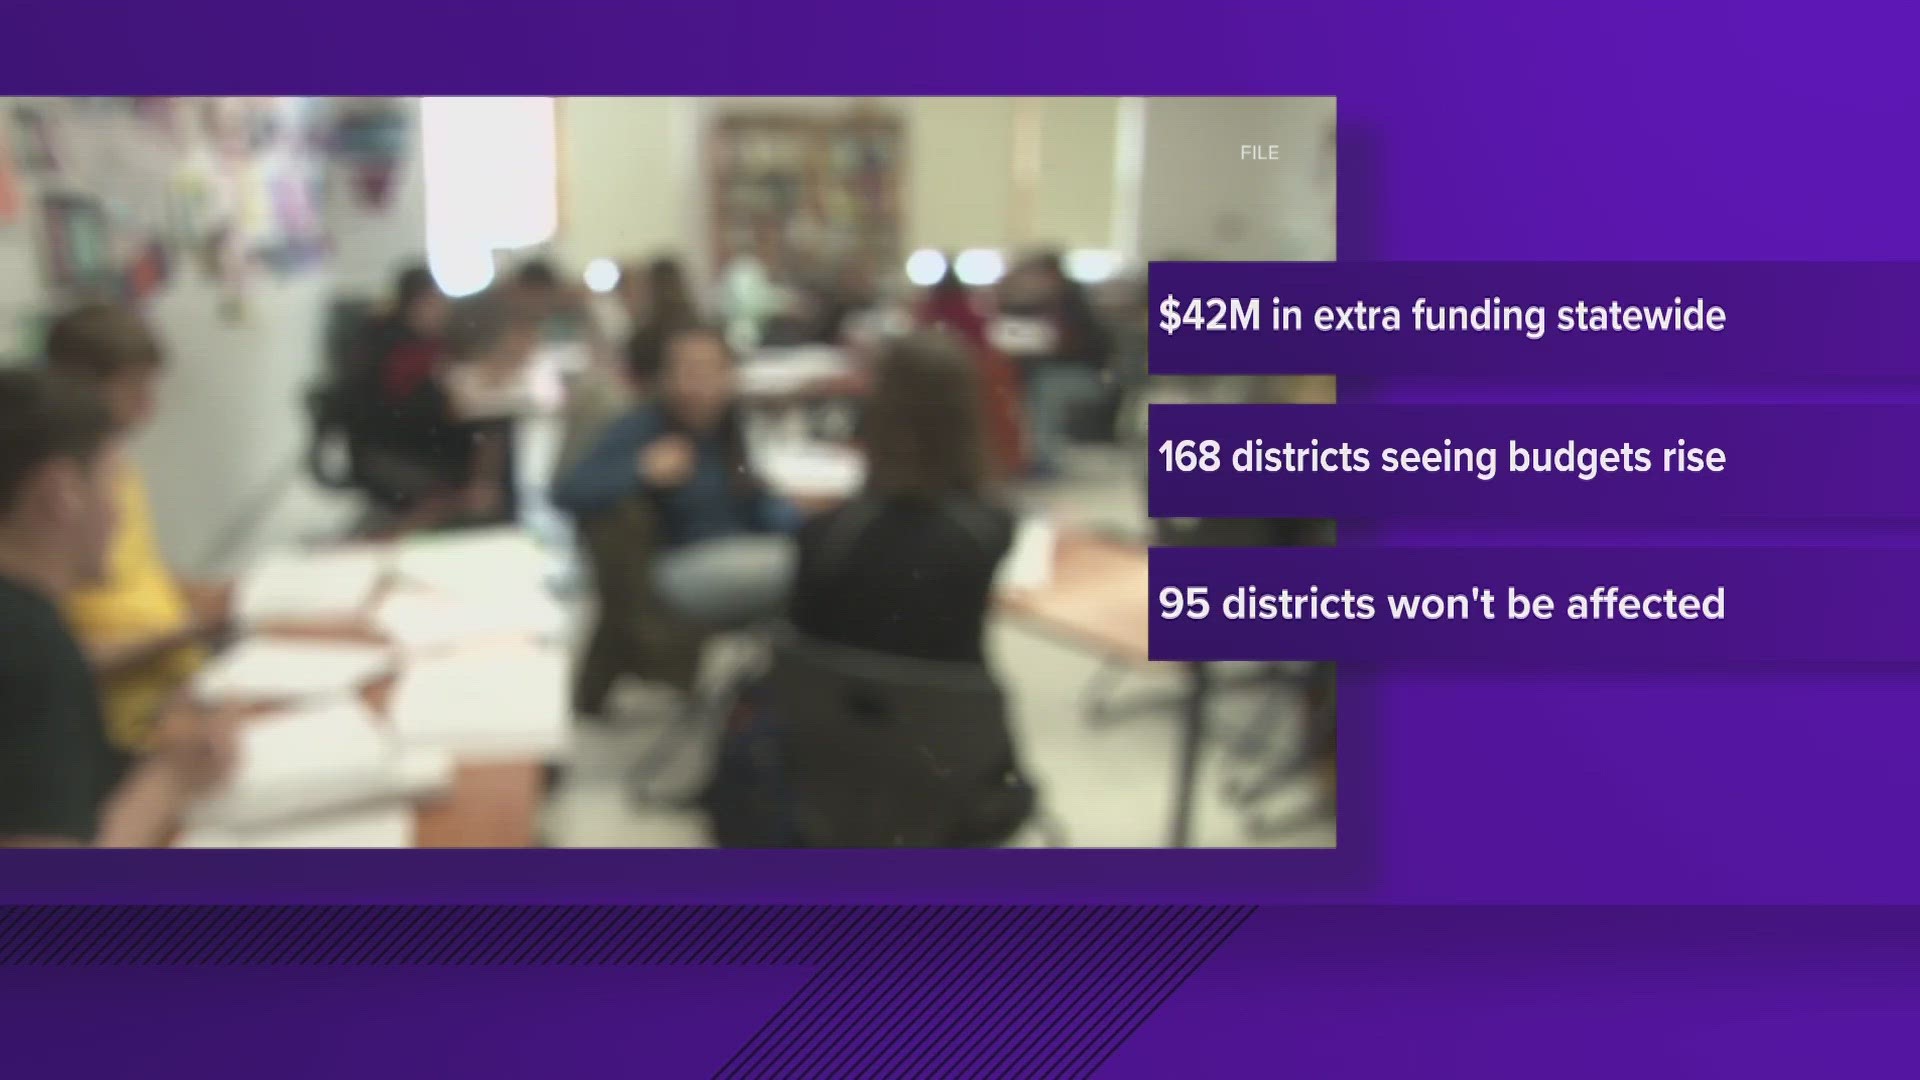 Officials with the Maine Department of Education announced yesterday that they had used faulty data in allocating funds to different districts.